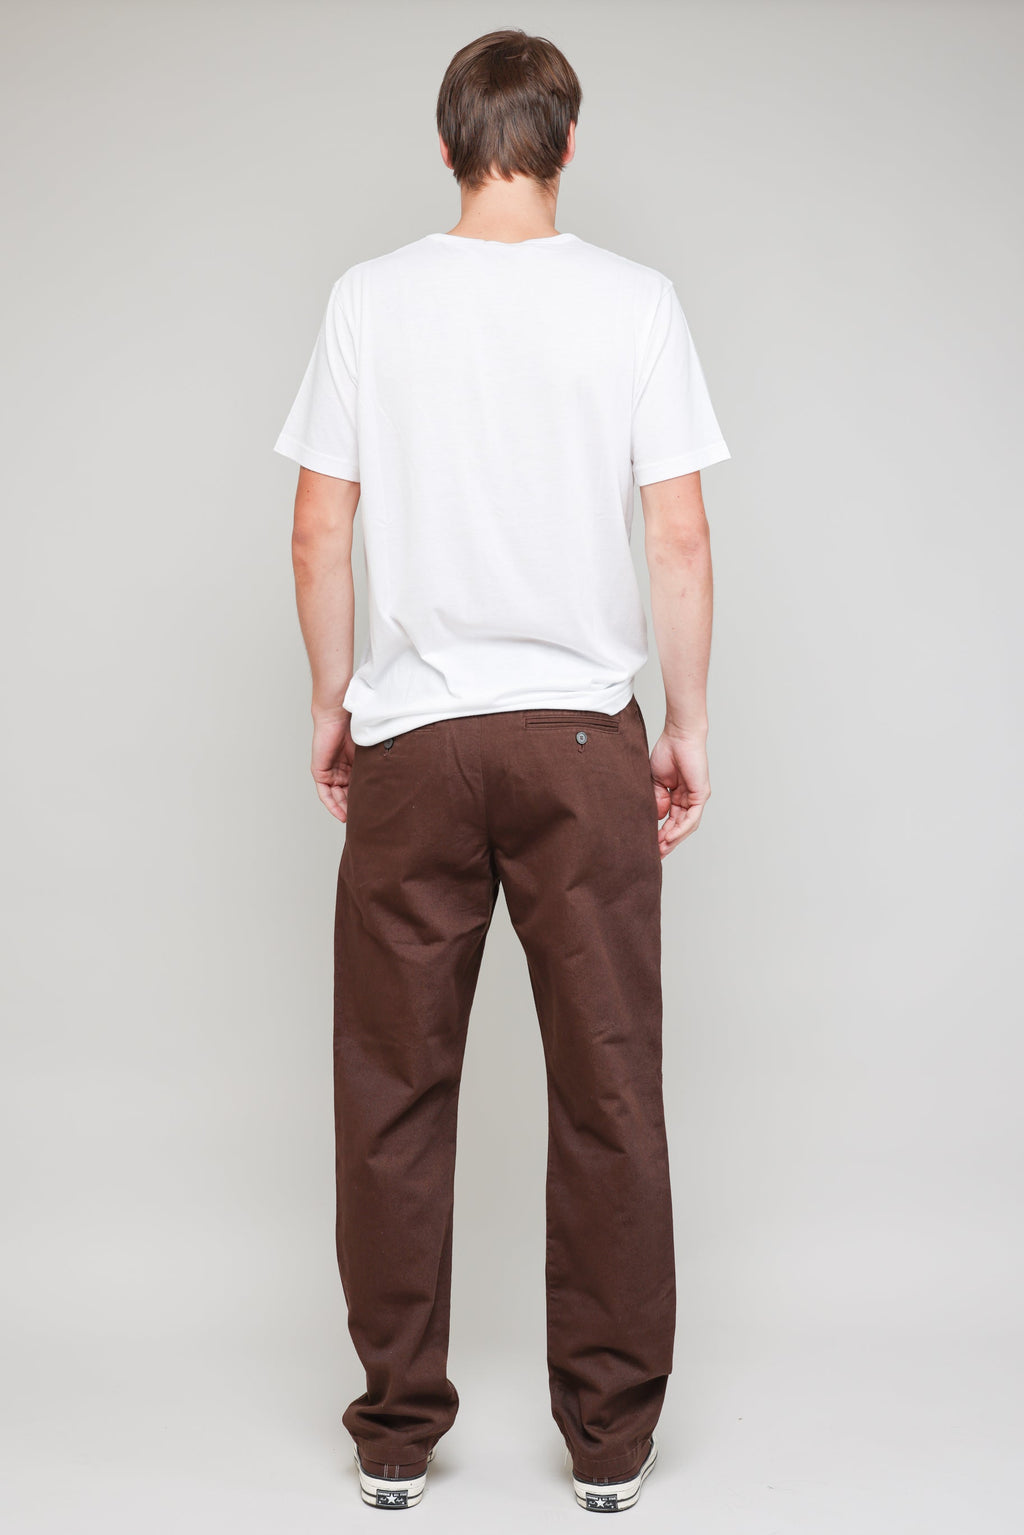 Pleated Chino Classic Tumbler Drill in Brown 04